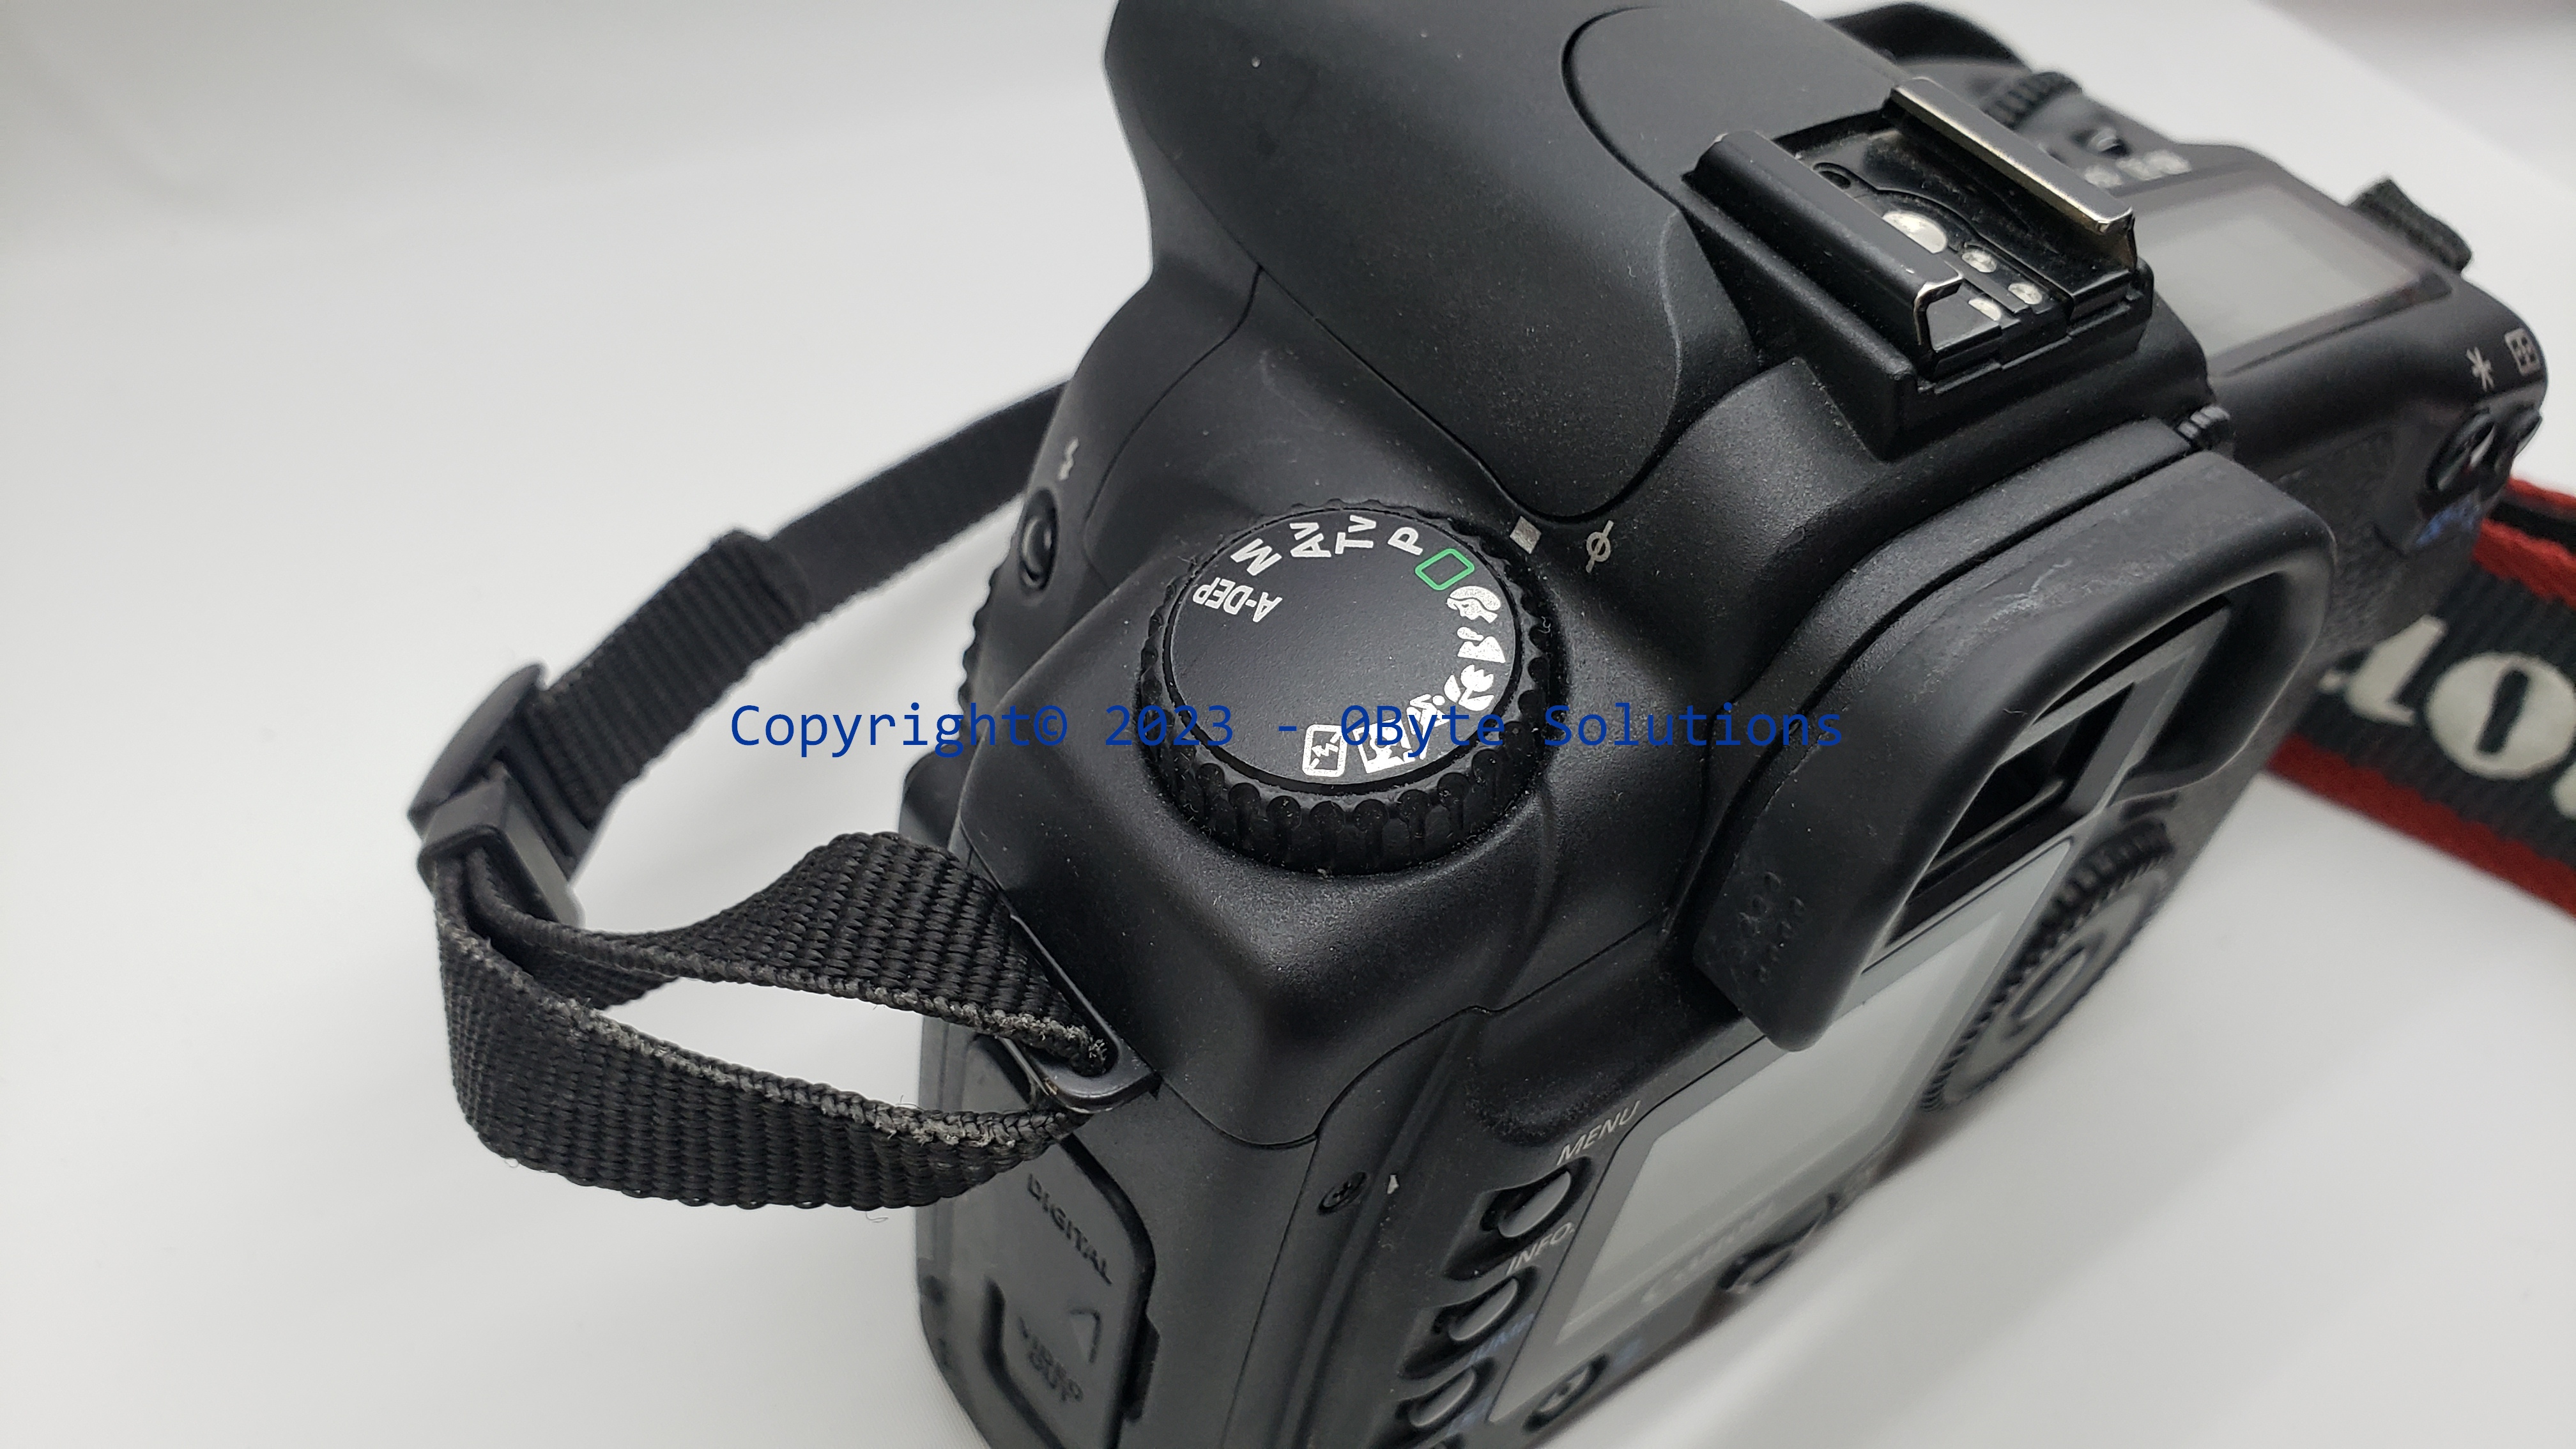 Canon DS126061 EOS 20D Digital SLR Camera [PARTS ONLY!]